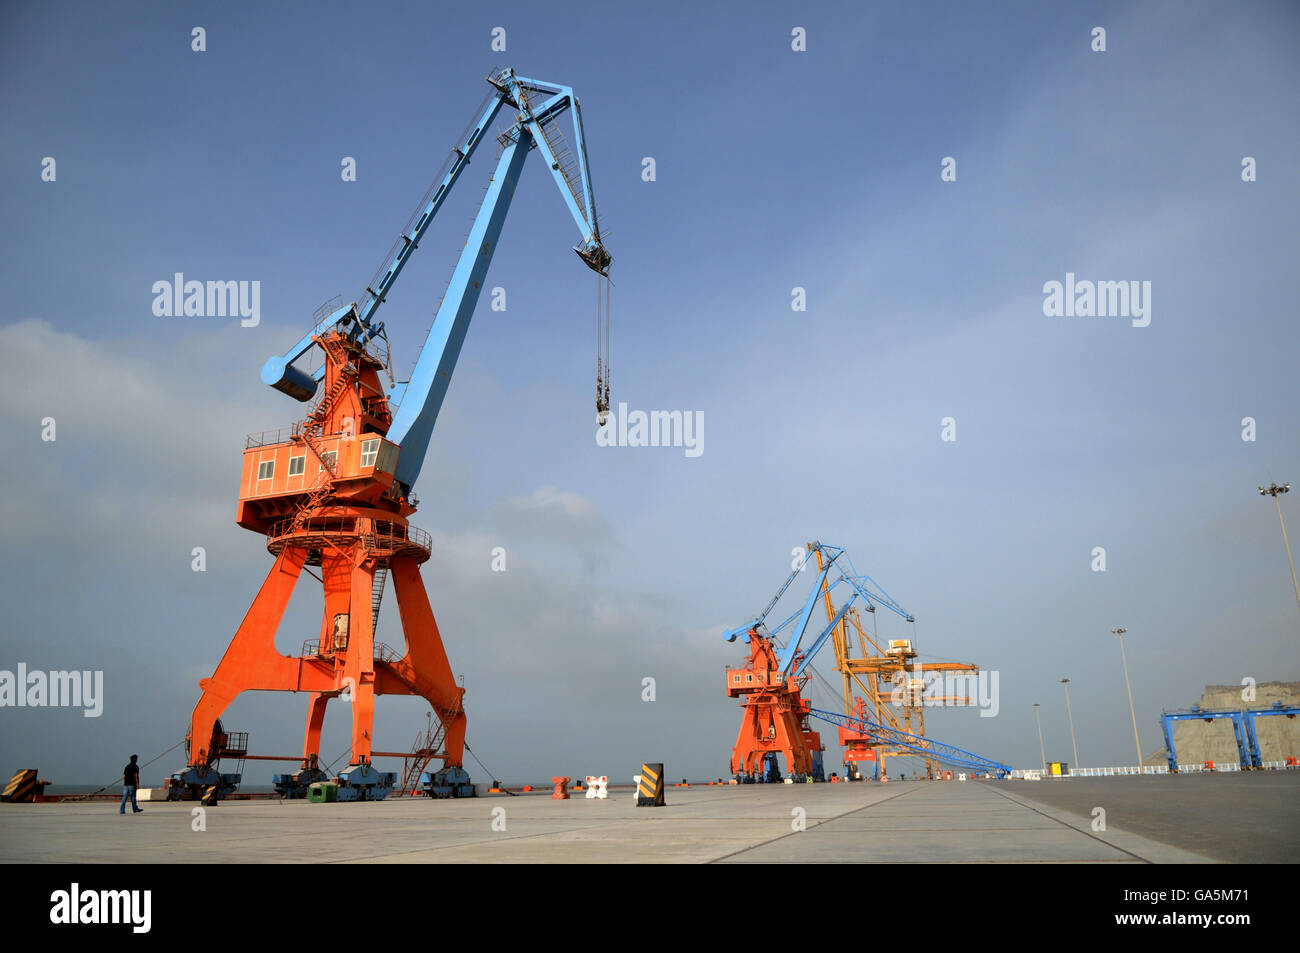 Gwadar. 2nd July, 2016. Photo taken on July 2, 2016, shows a view of Gwadar Port in southwest Pakistan. Gwadar Port is a warm-water, deep-sea port situated on the Arabian Sea in Balochistan province of Pakistan. China and Pakistan agreed to build China-Pakistan Economic Corridor(CPEC), a major and pilot project under the Belt and Road Initiative, to connect the Pakistani Gwadar port with Kashgar city in China's Xinjiang Uygur Autonomous Region. © Ahmad Kamal/Xinhua/Alamy Live News Stock Photo